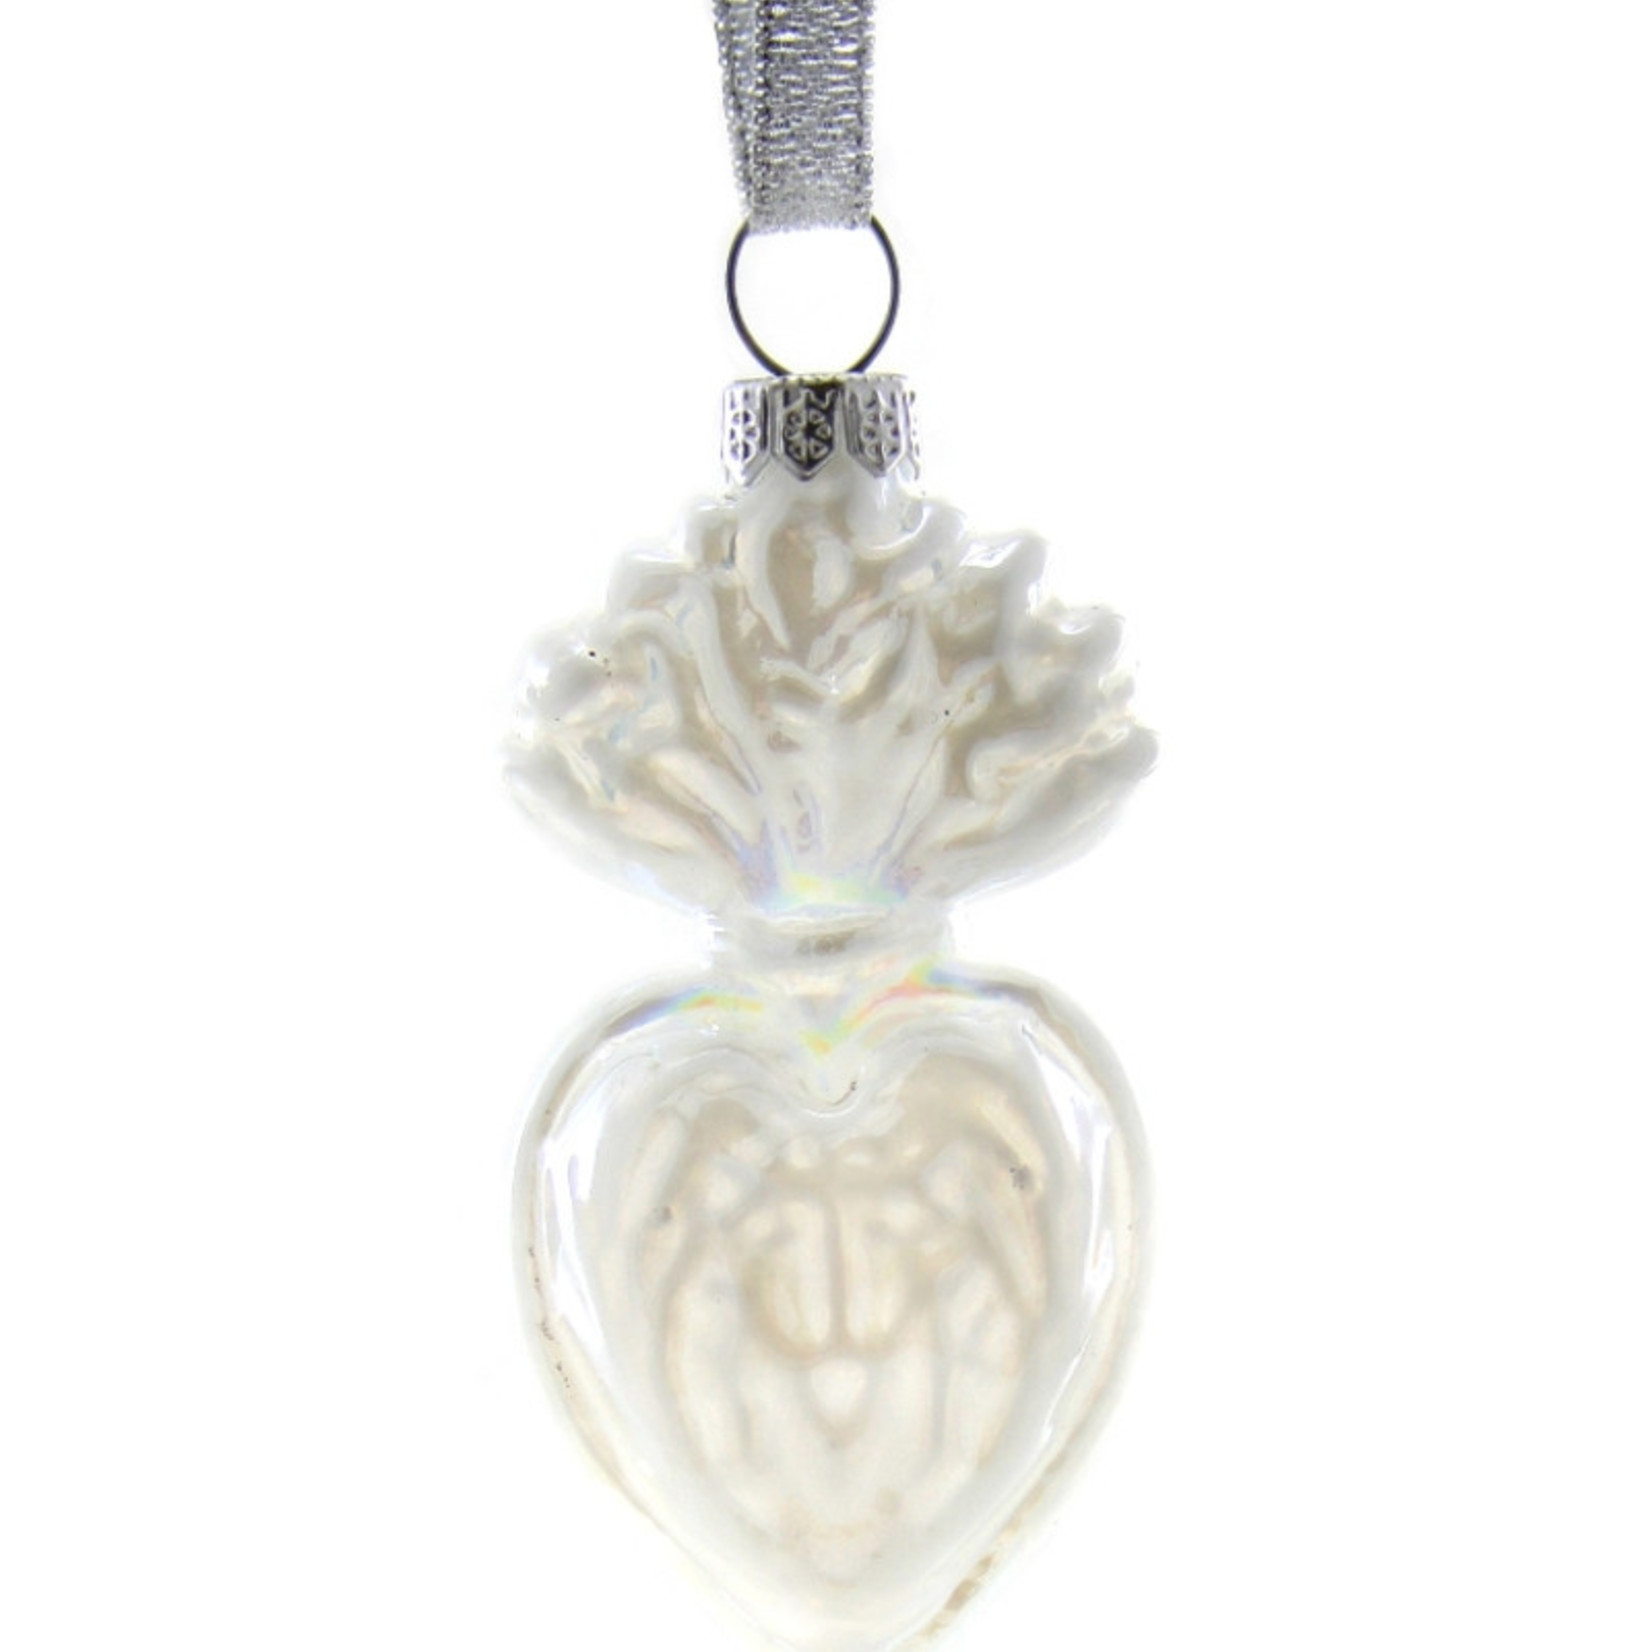 Scared Heart Small, Ivory Ornament